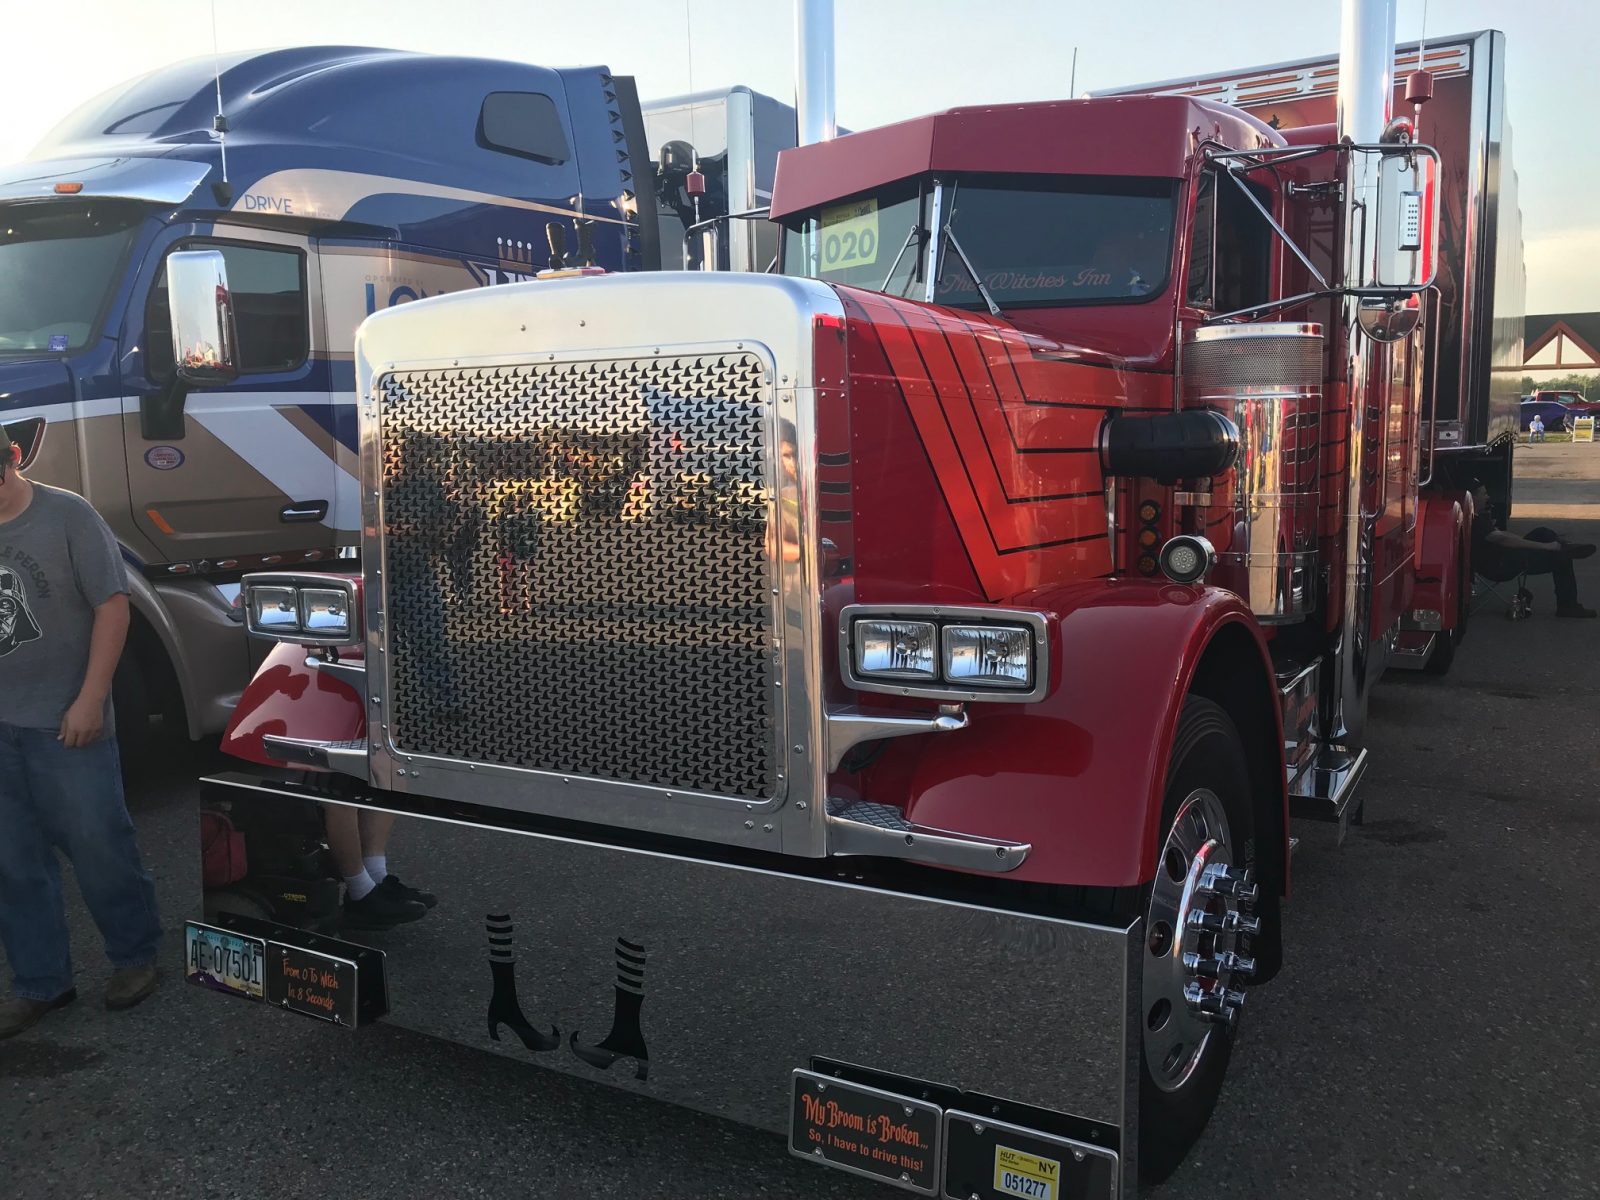 Witchthemed Peterbilt with 2.9 million miles wins Shell Rotella Super